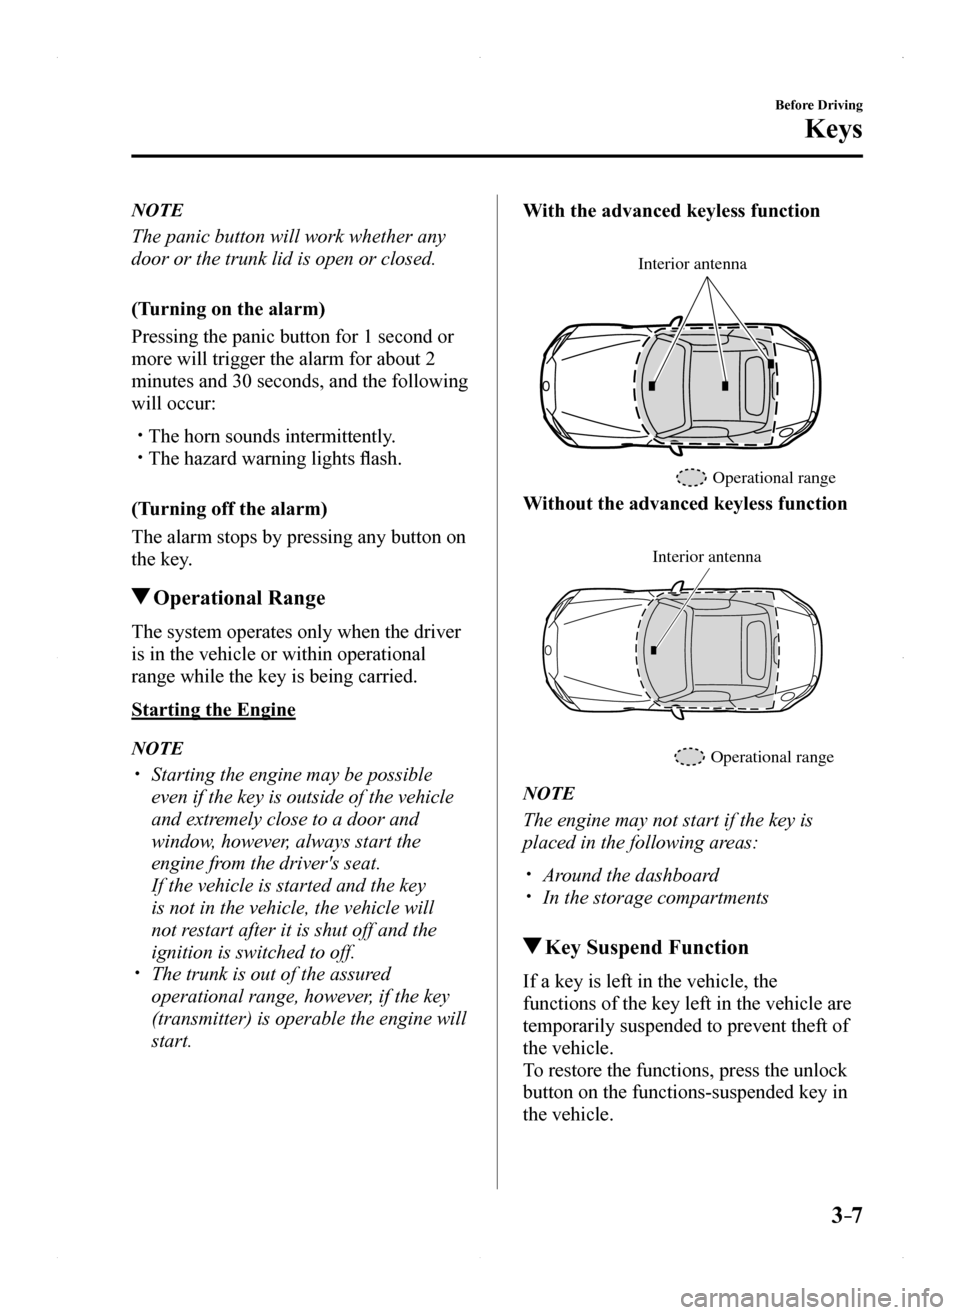 MAZDA MODEL MX-5 2016  Owners Manual (in English) 3–7
Before Driving
Keys
NOTE
The panic button will work whether any 
door or the trunk lid is open or closed.
(Turning on the alarm)
Pressing the panic button for 1 second or 
more will trigger the 